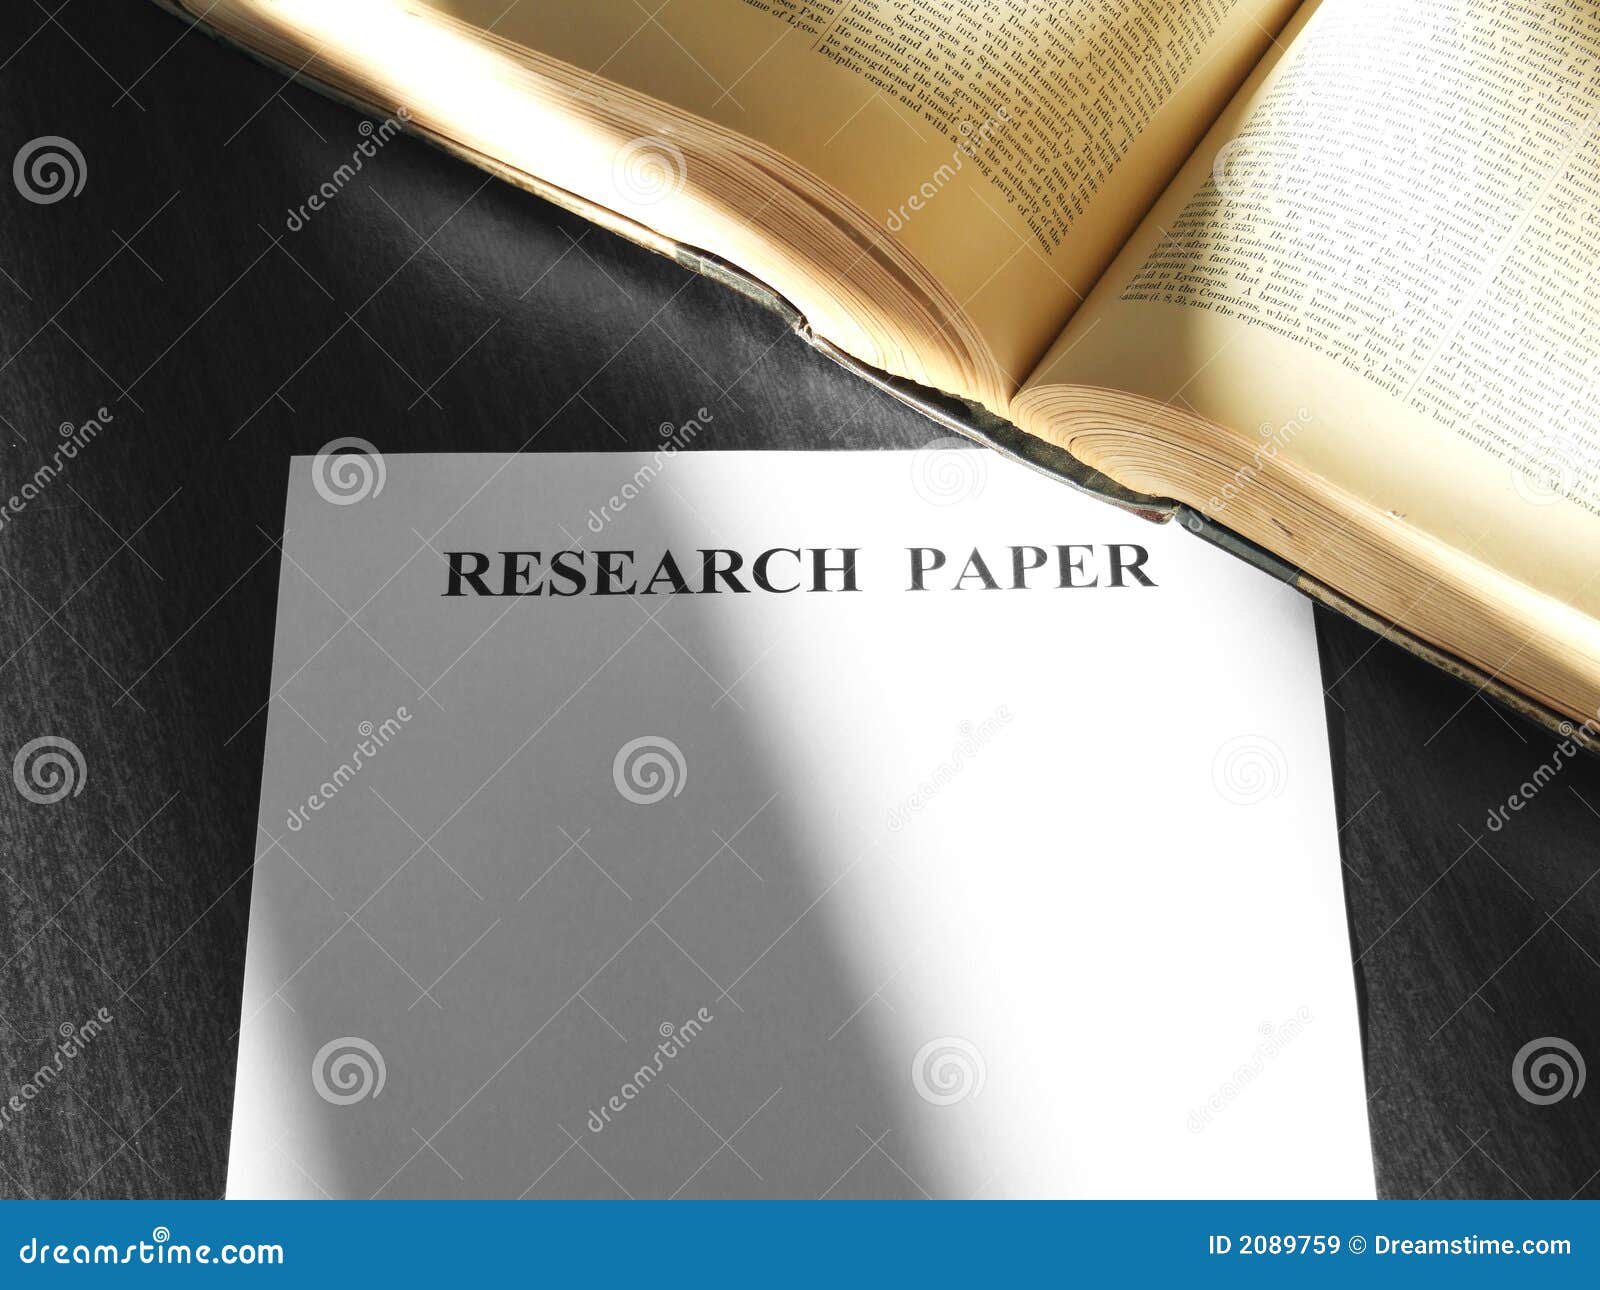 Free research papers downloads